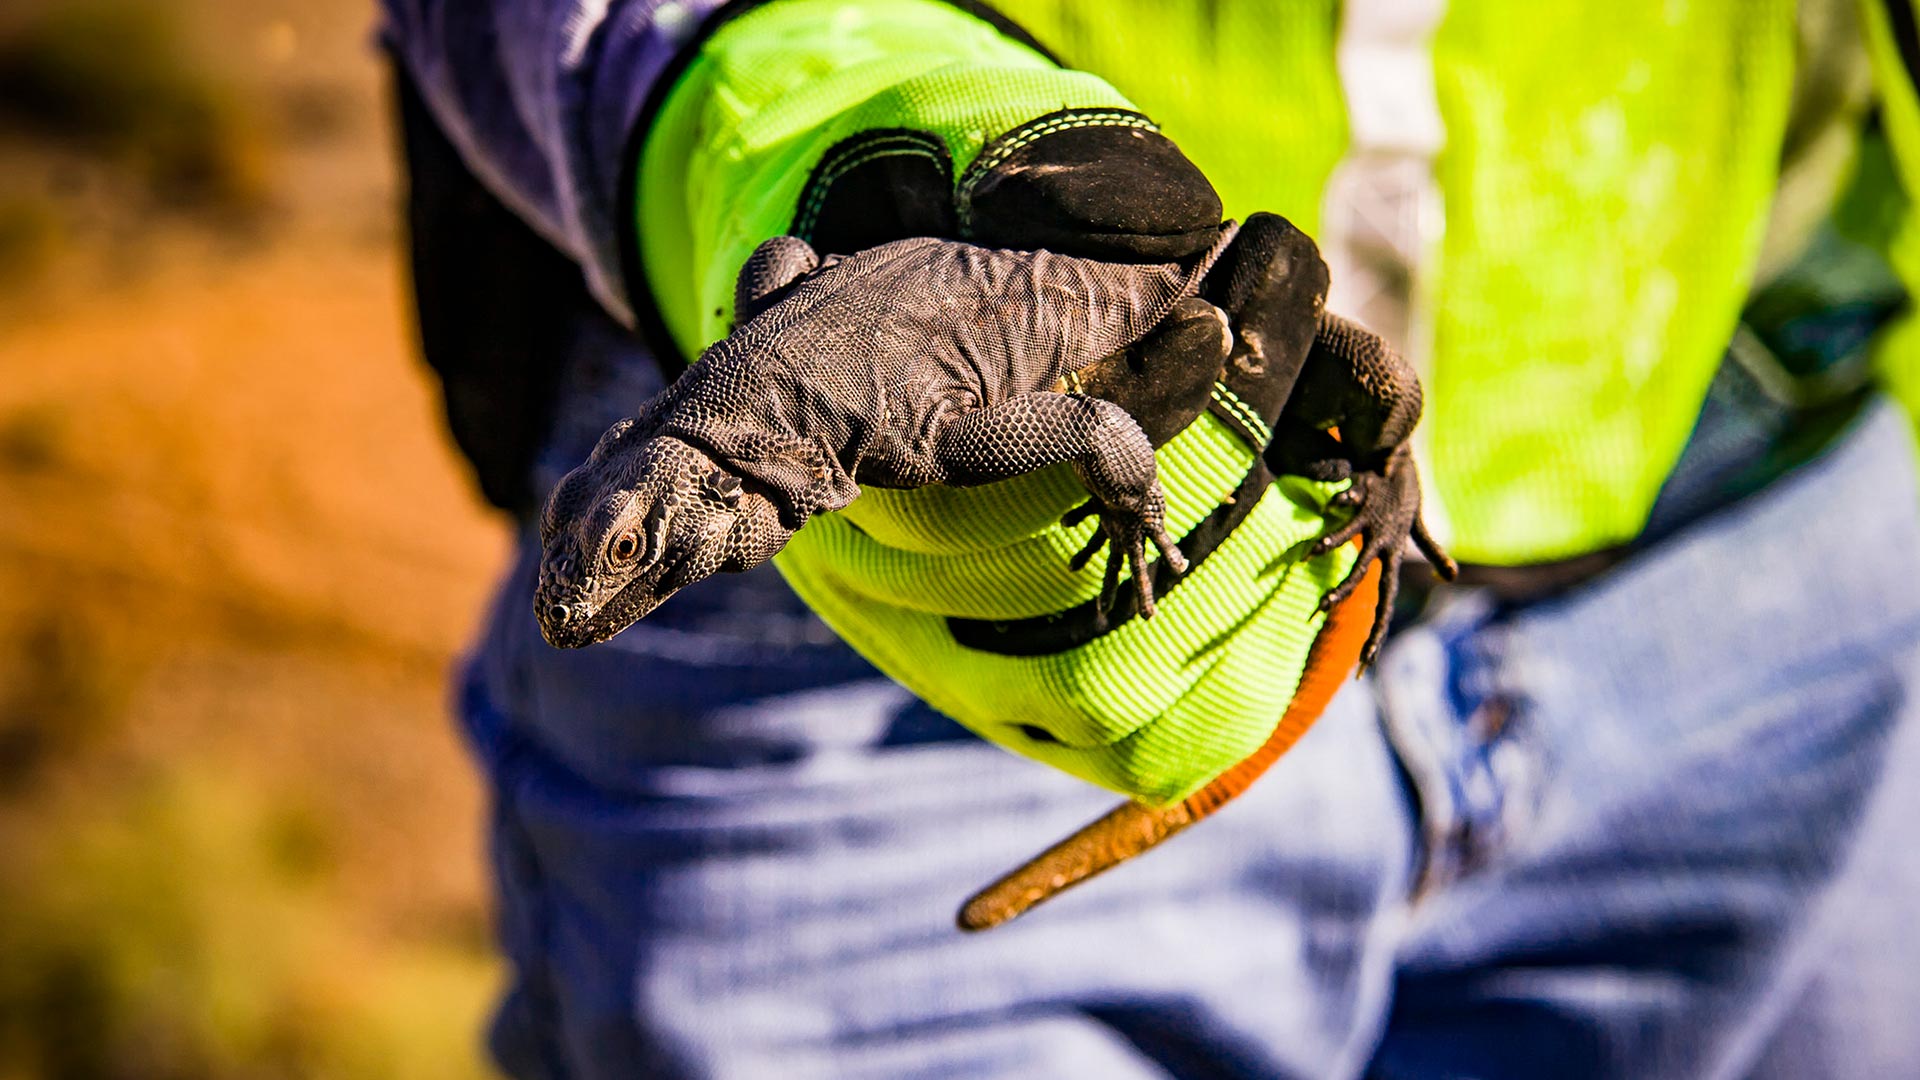 Chuckwallas are being relocated to a nature preserve, where they will be protected from hunters by an order.